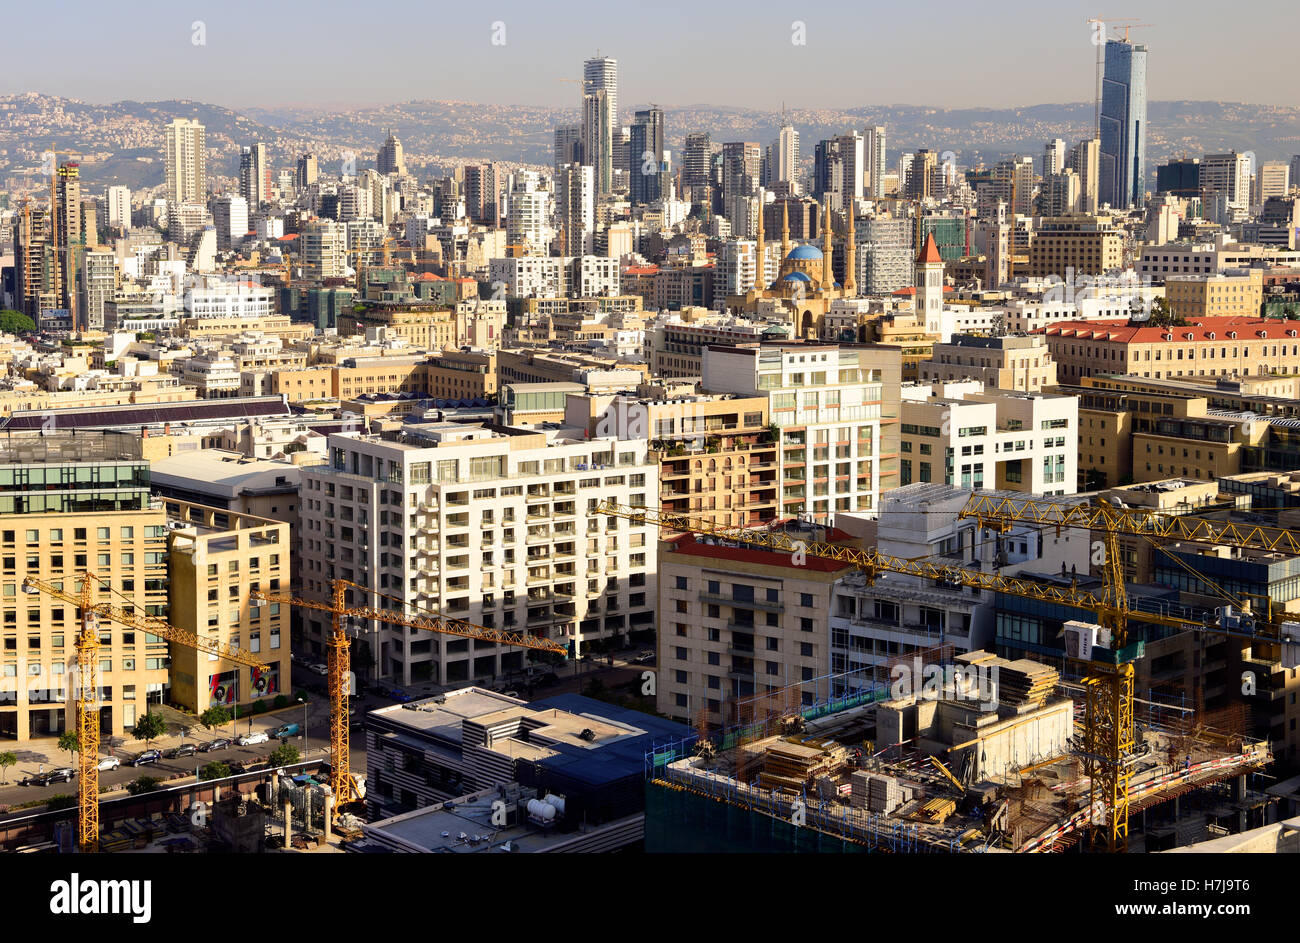 General view over the capital city Beirut, Lebanon. Stock Photo